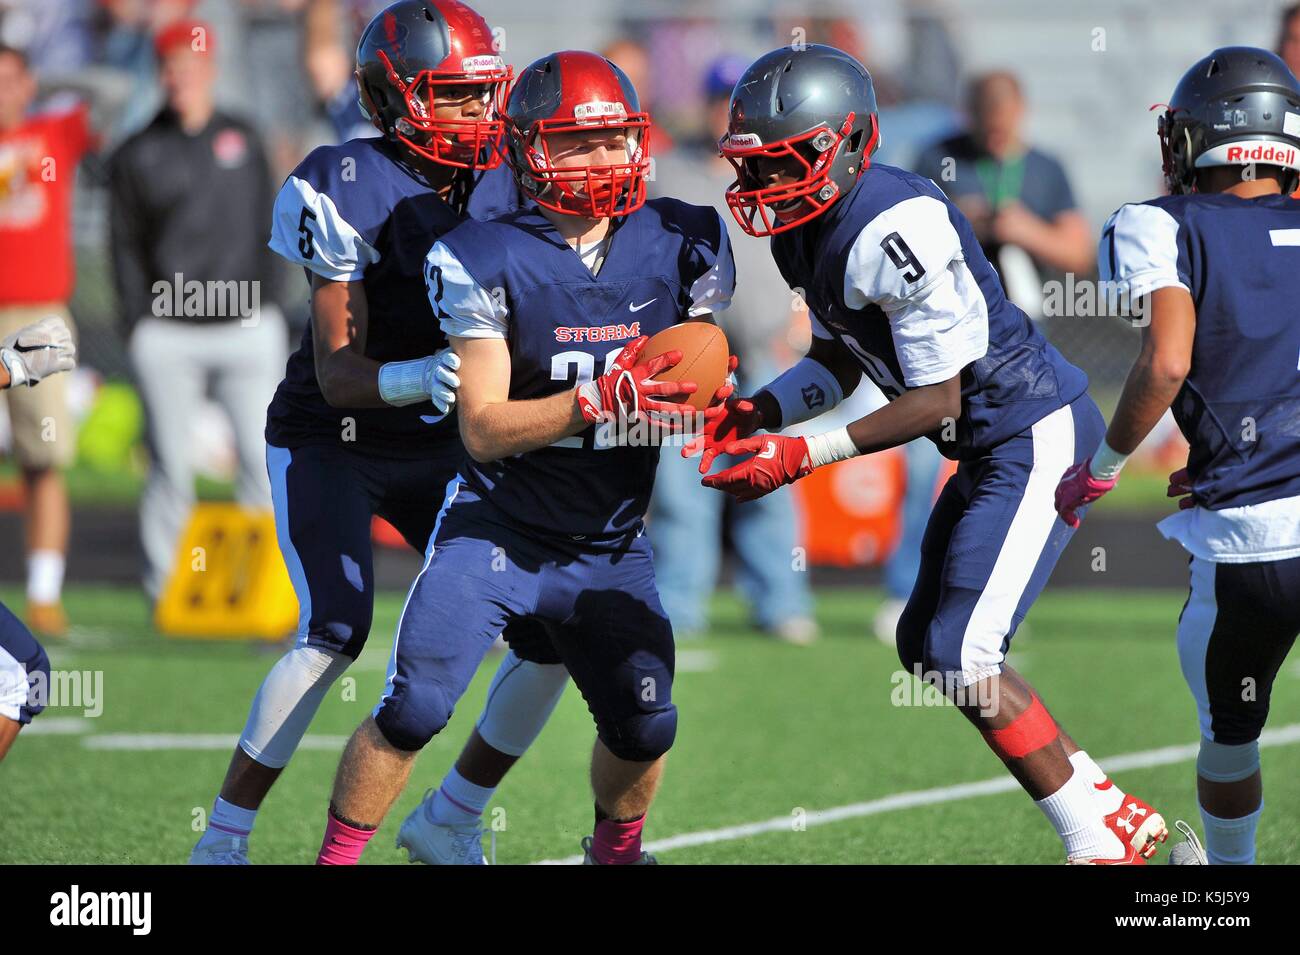 High school running back accepting a hand off from his quarterback. USA. Stock Photo